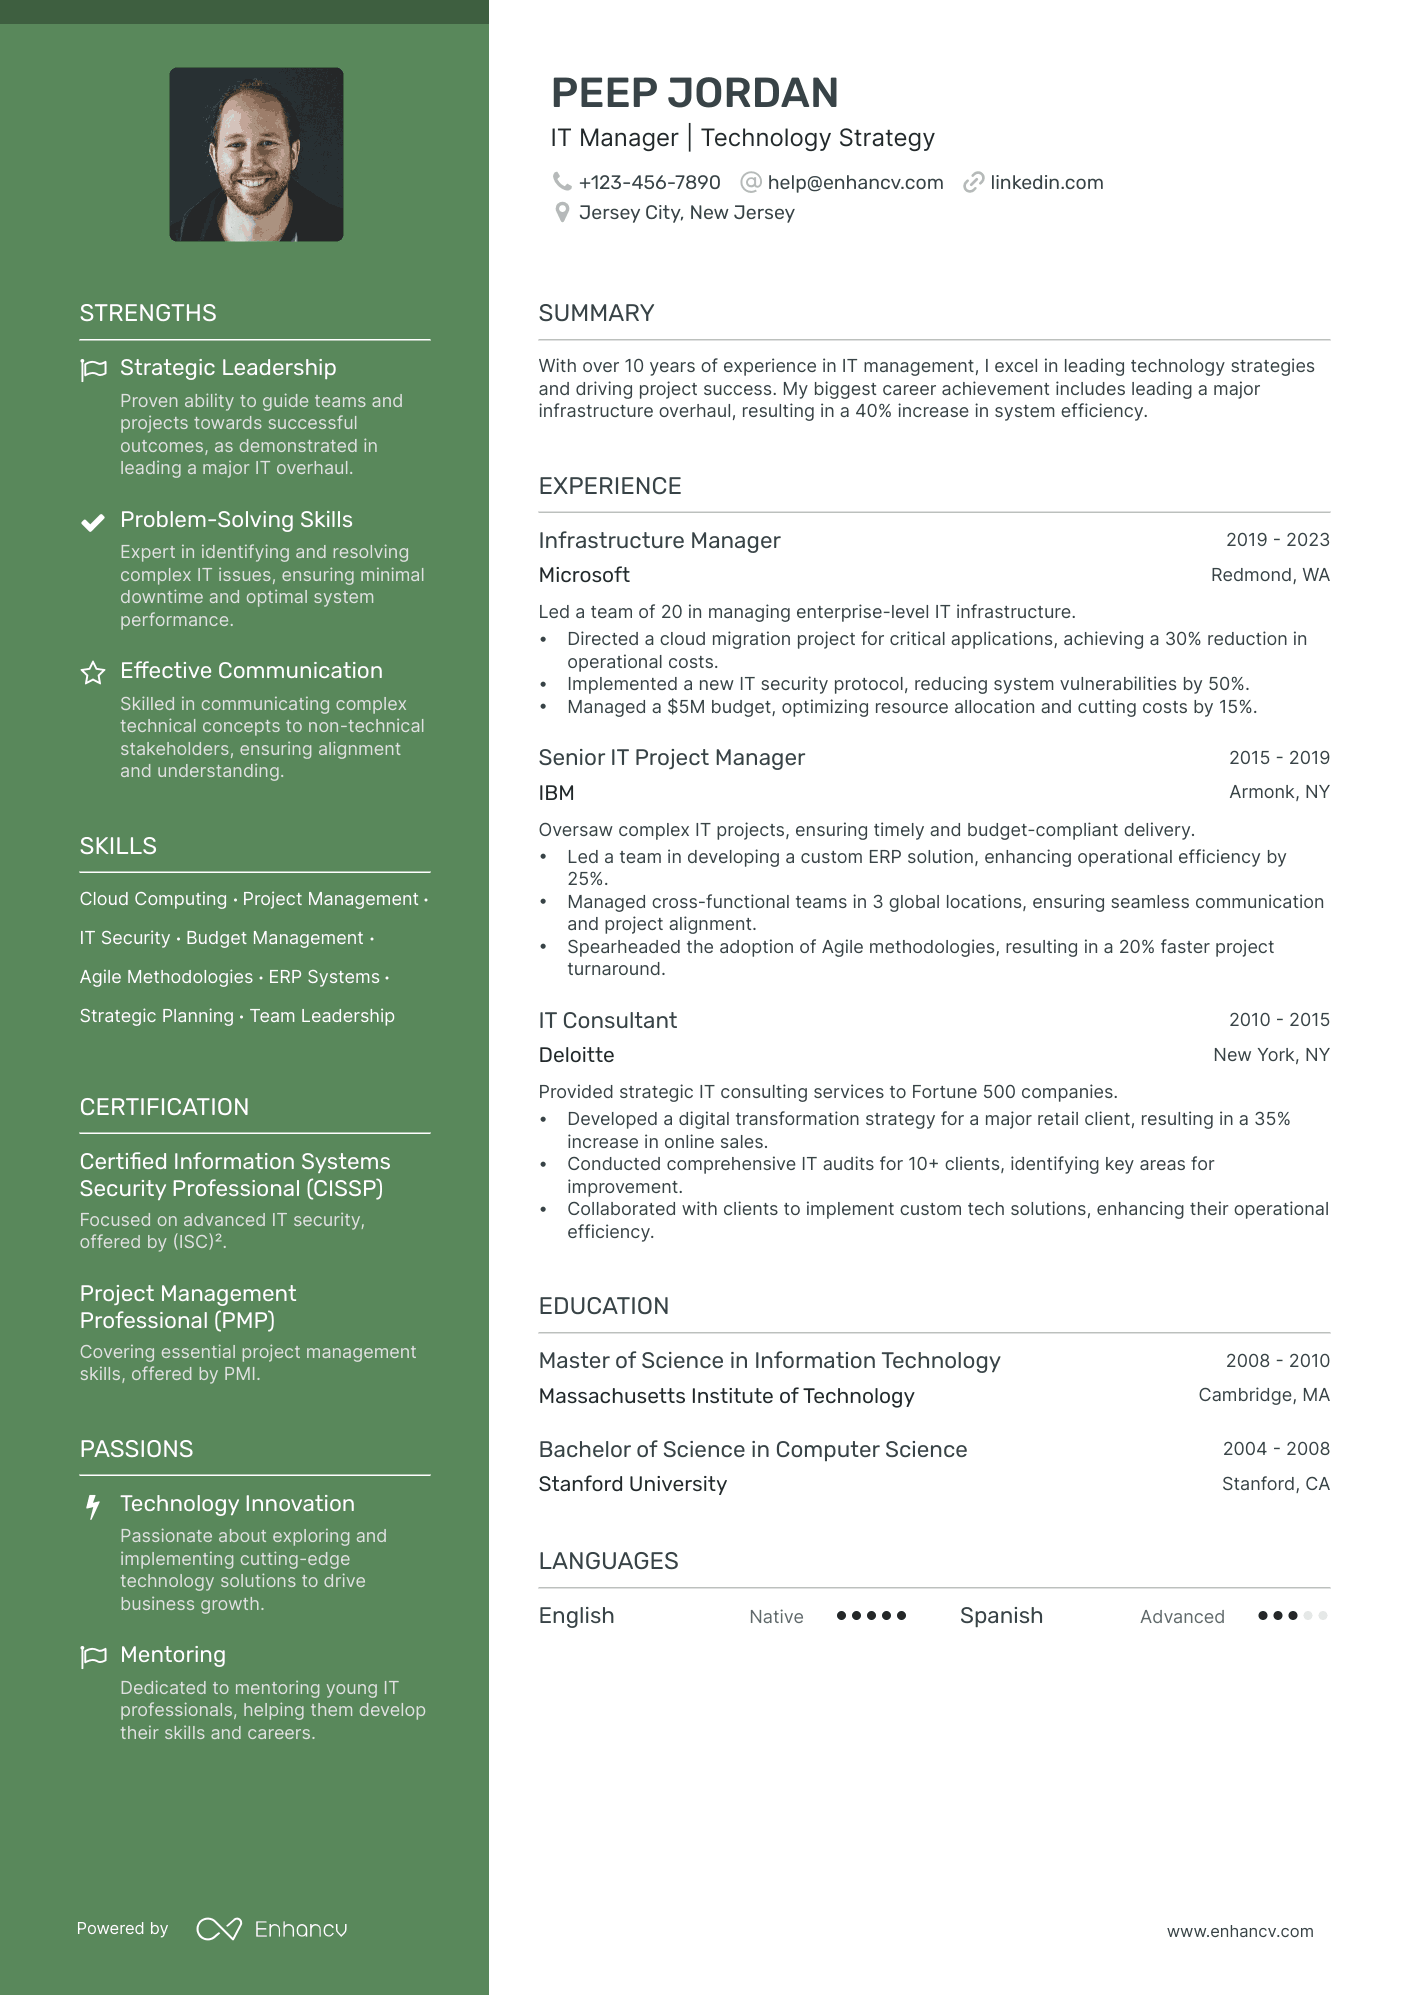 IT Manager resume example